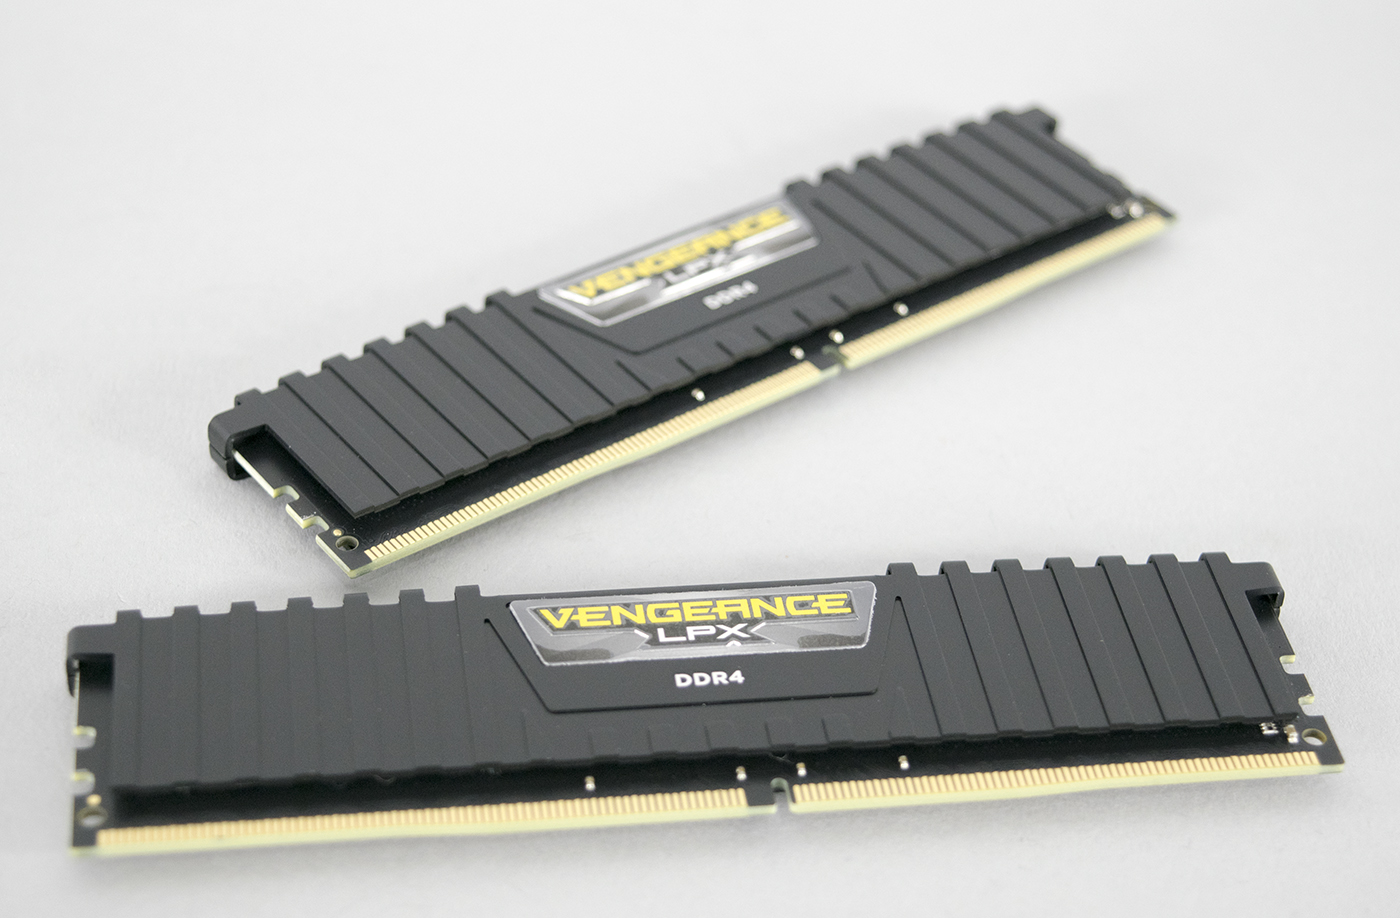 Corsair Vengeance DDR4 2666MHz 16GB (2x8GB) Review Page | Play3r